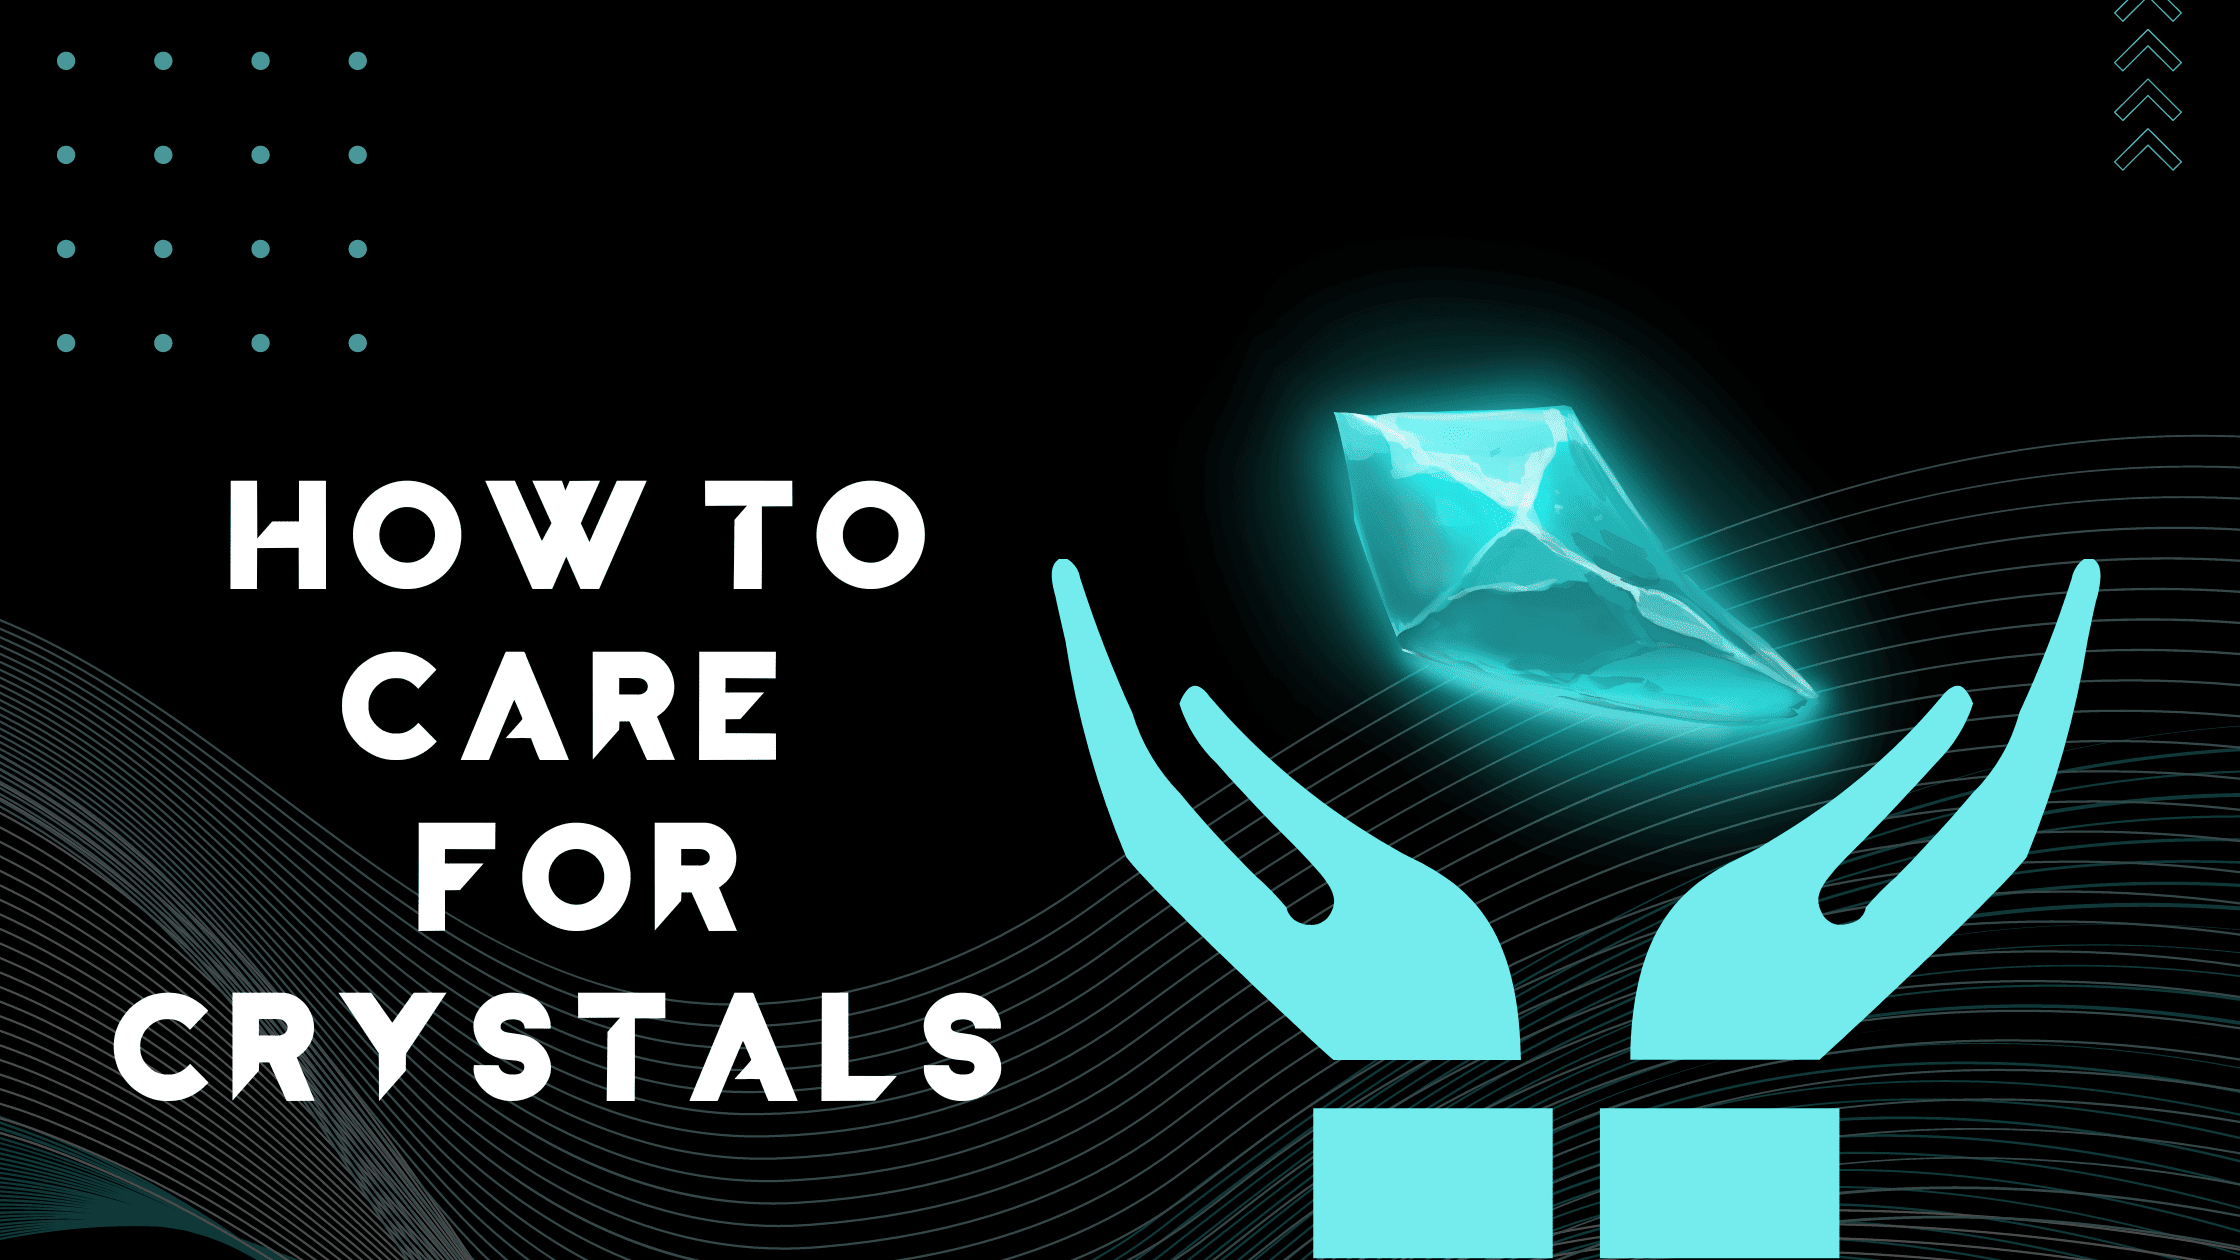 HOW TO CARE FOR CRYSTALS